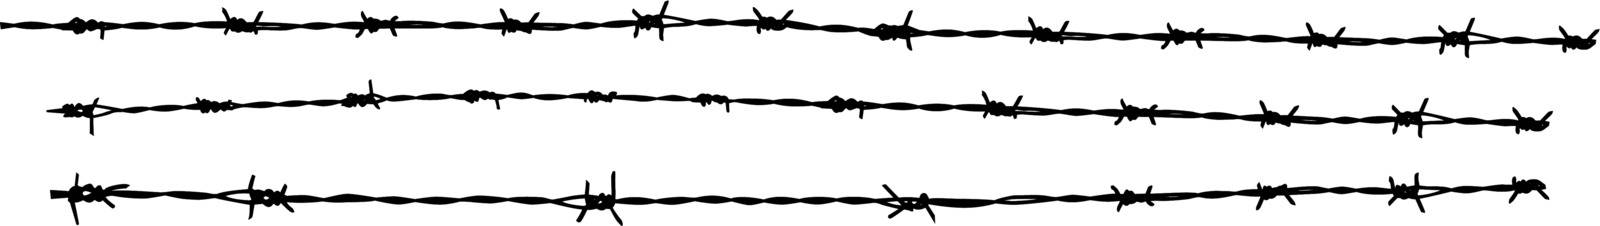 Barbed wire by ints